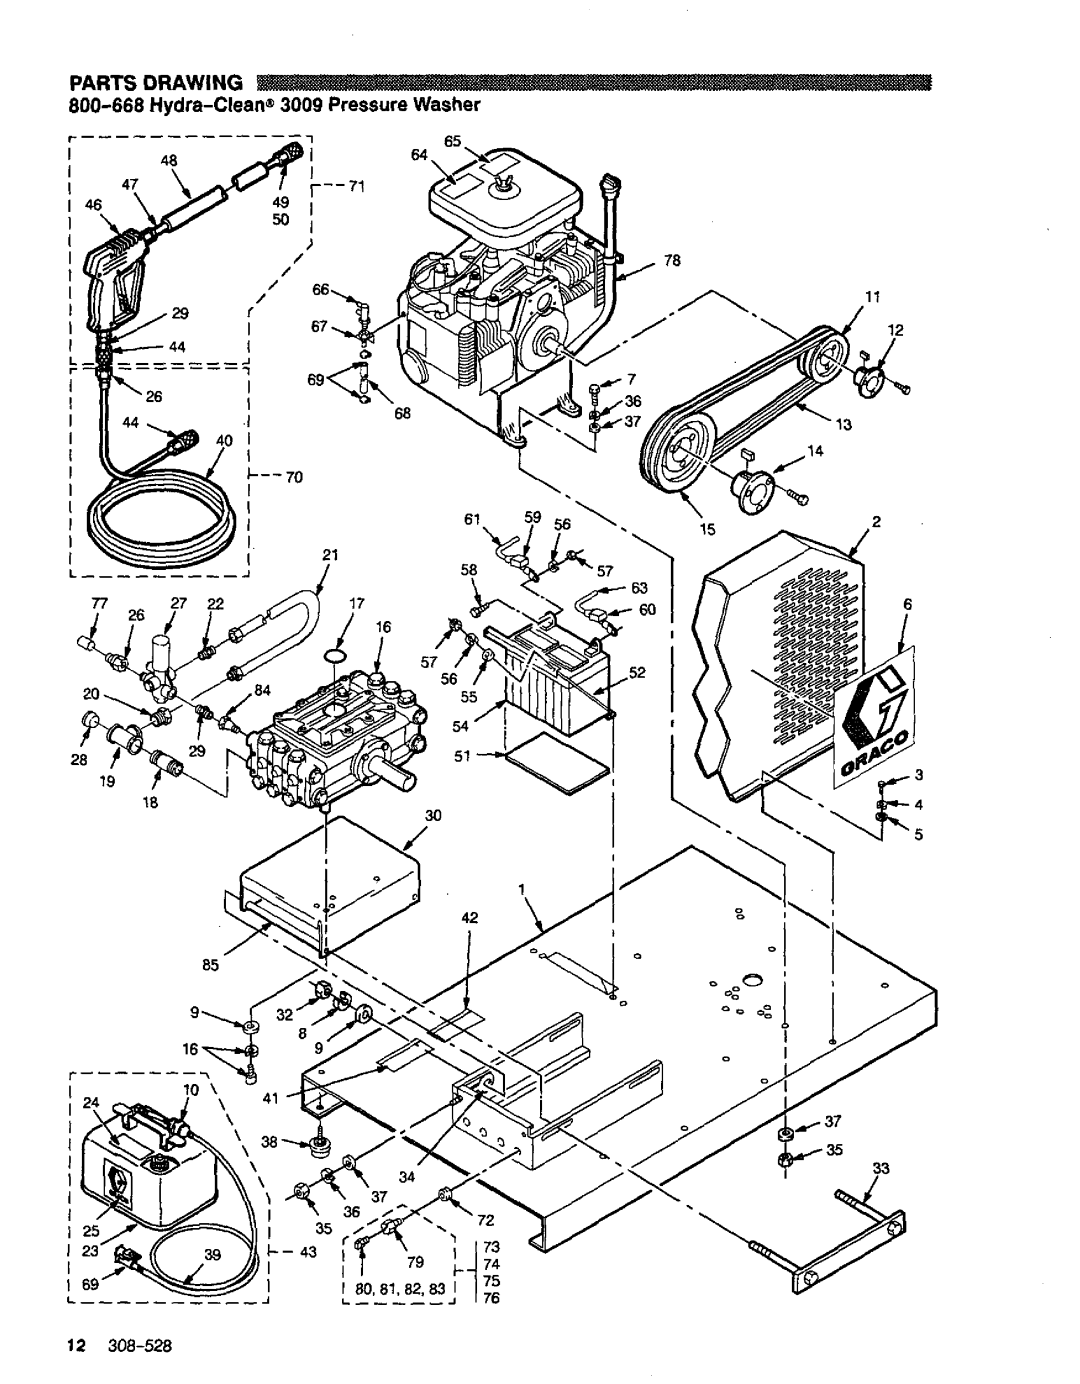 Graco Inc 800-668, 800-666 manual Hydra-Clean6 3009 Pressure Washer, 12308-528, Parts Drawing 